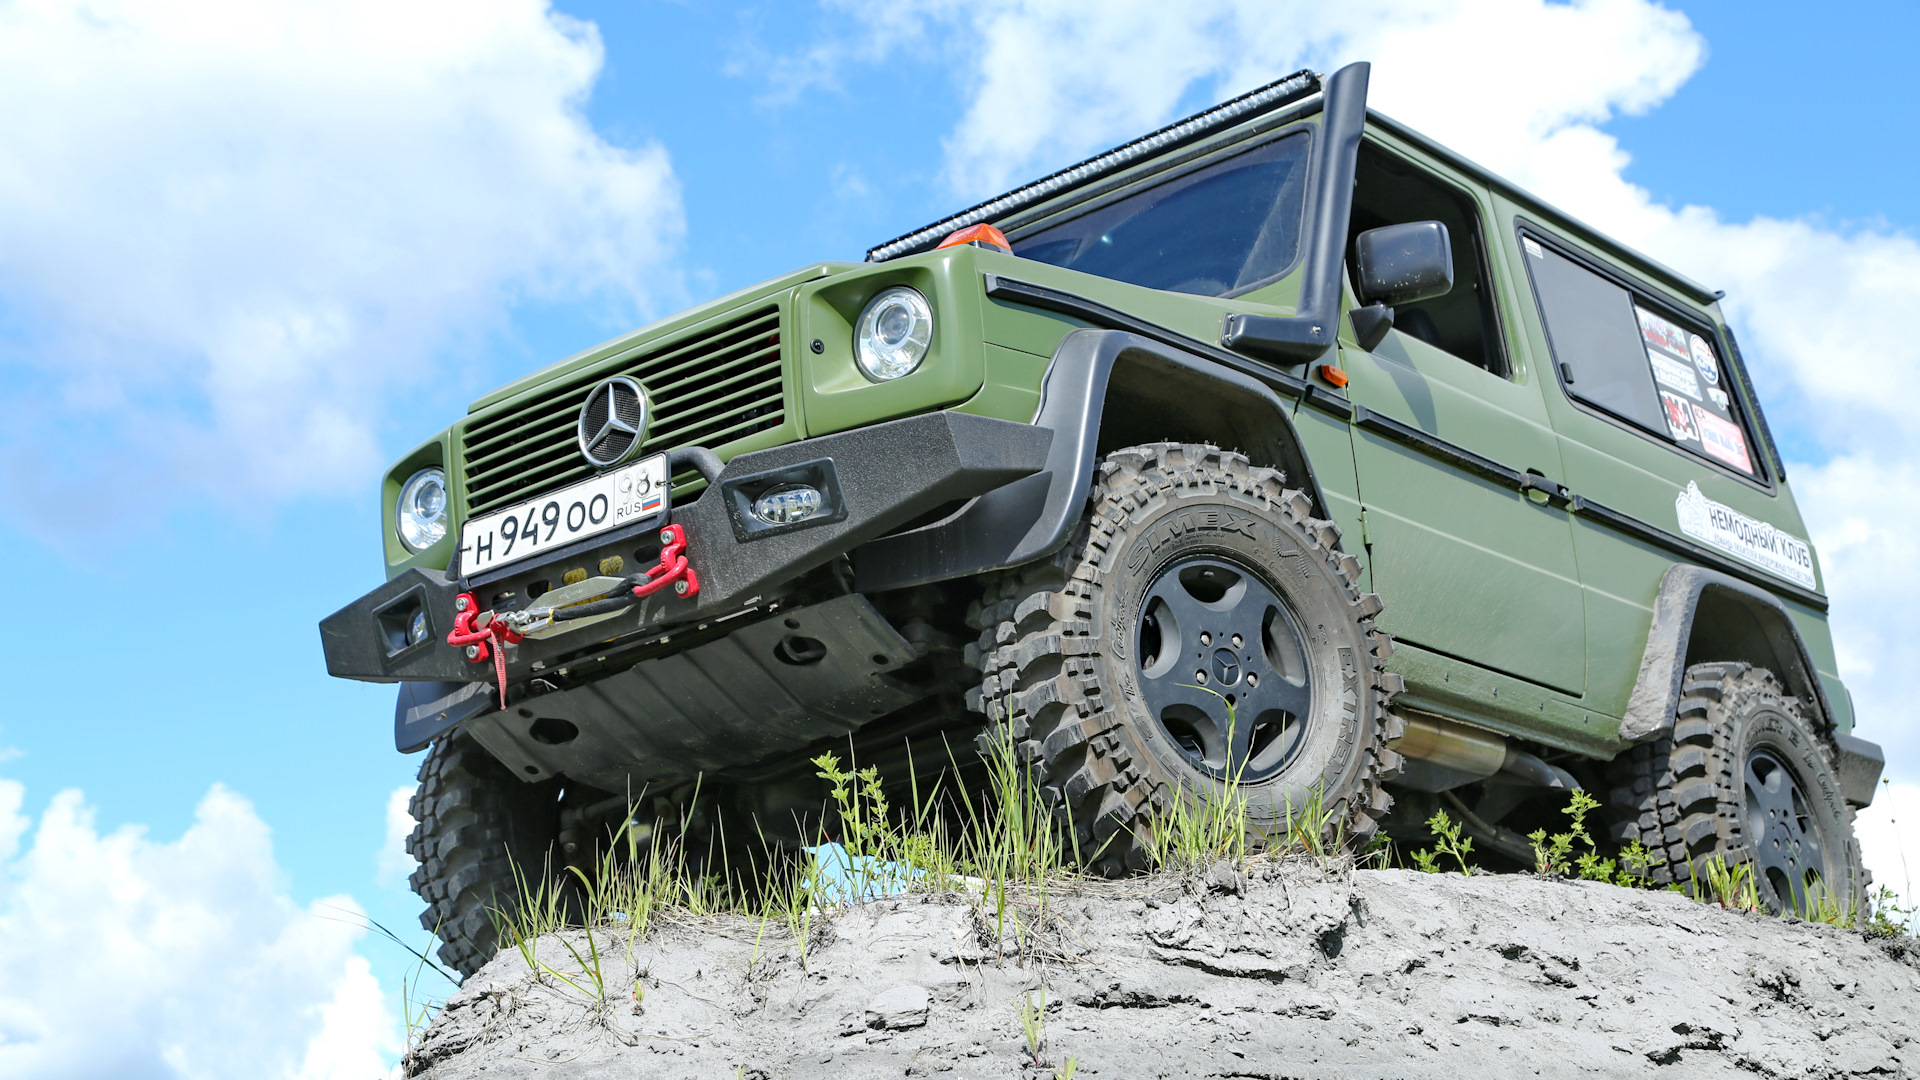 Off road 4 на 4. Mercedes-Benz g460 off Road. Mercedes Benz g230. Мерседес Гелендваген оффроад. Mercedes-Benz g-class w461 Tuning.